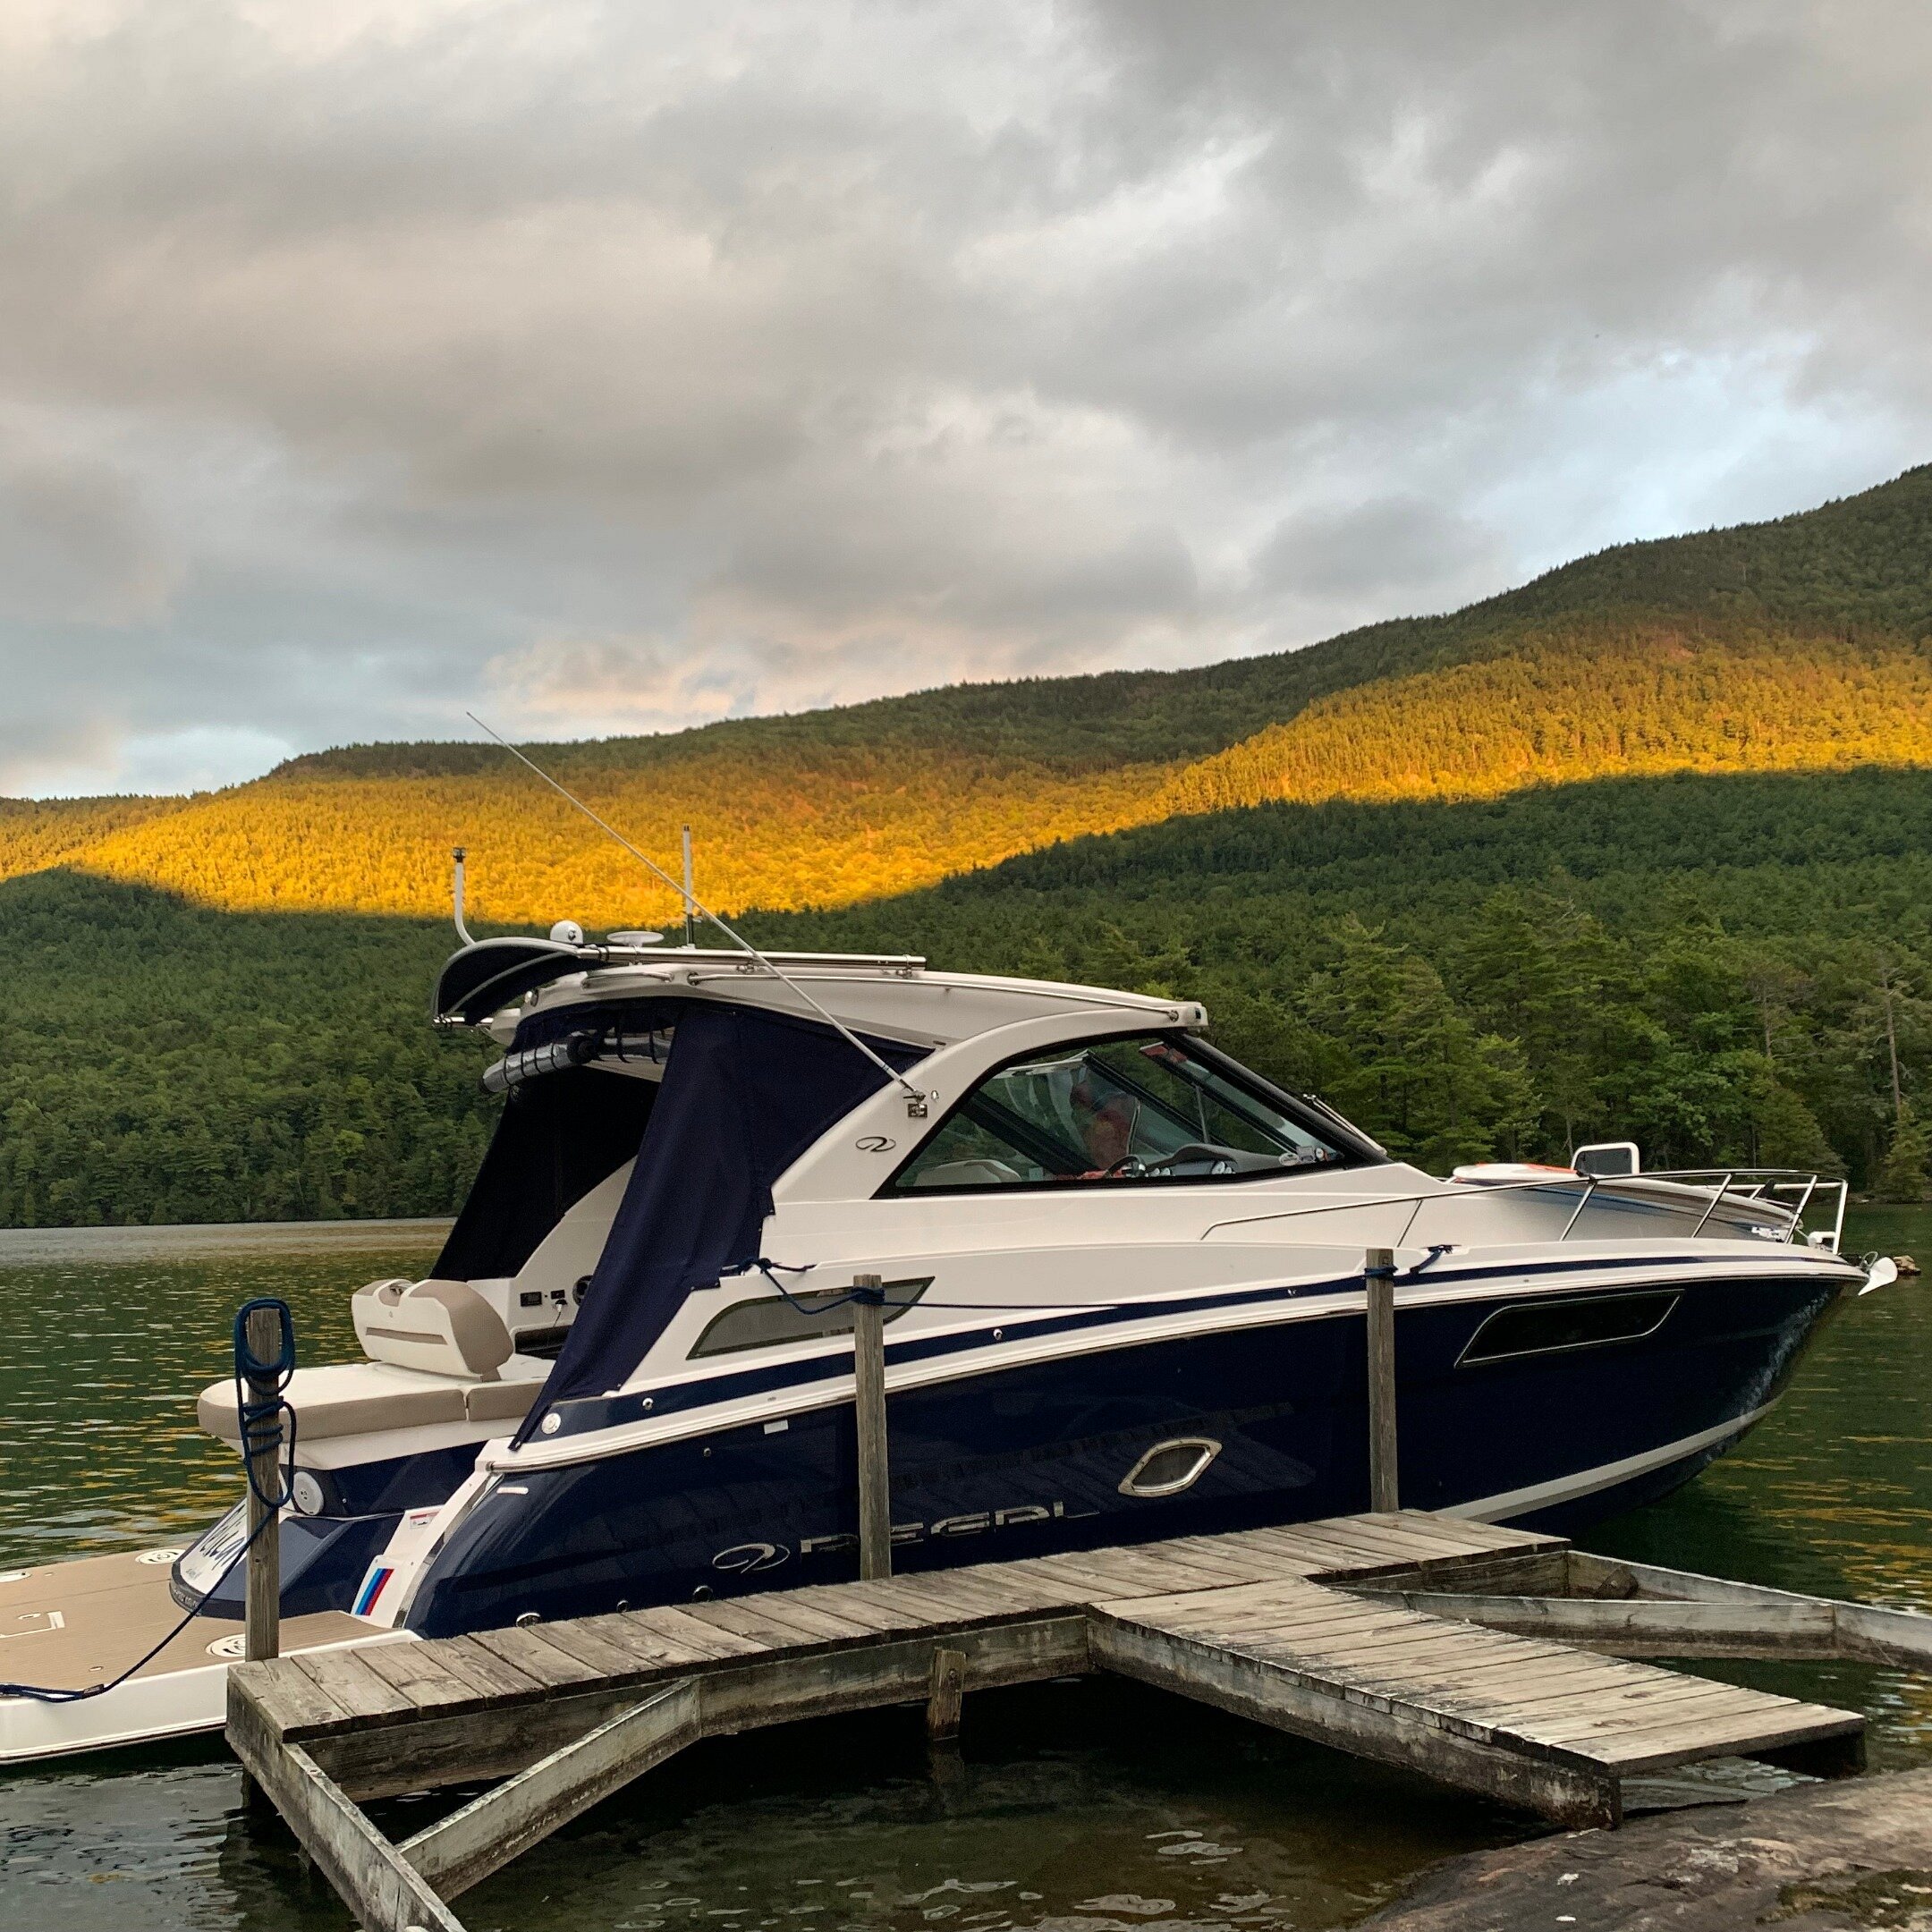 Boat Scenic Lake on a 37' Cruiser What to Know BEFORE You Go